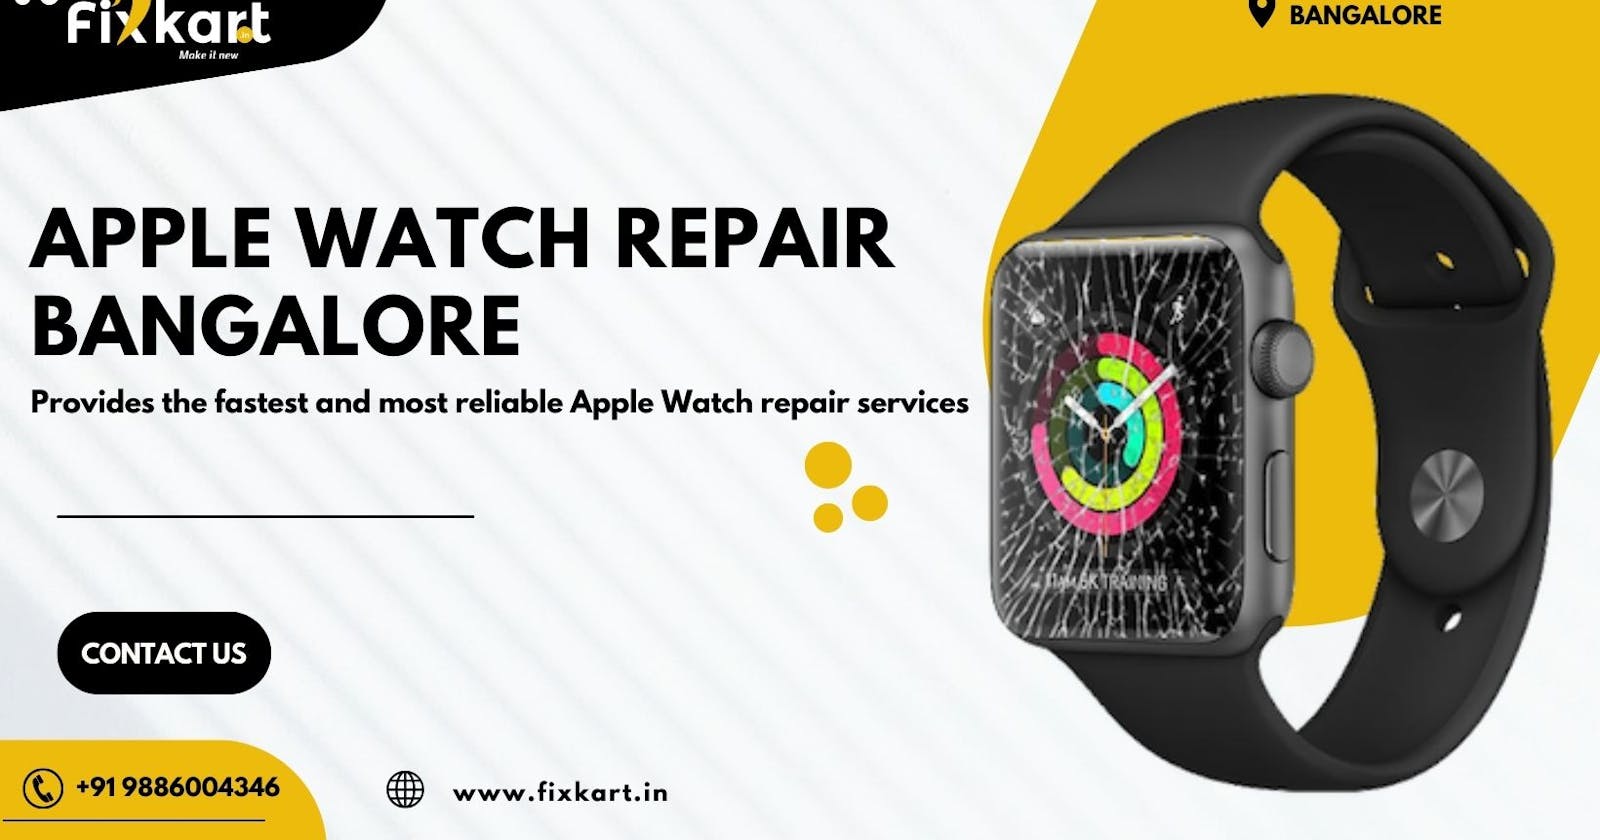 FixKart: Your One-Stop Solution for Apple Watch Repair in Bangalore!